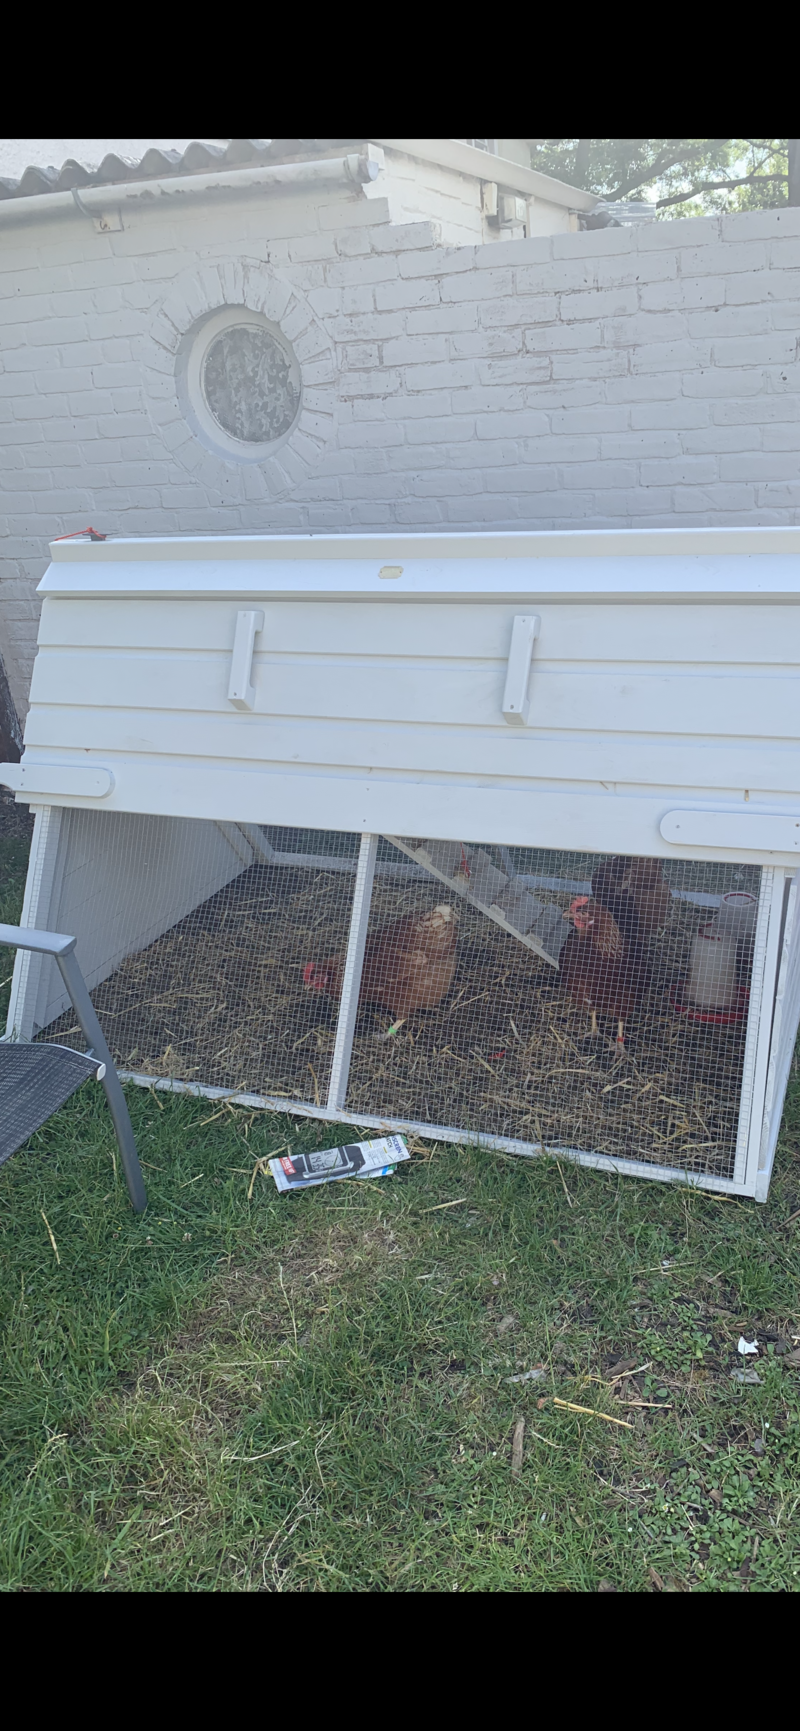 A chicken coop and run painted in white